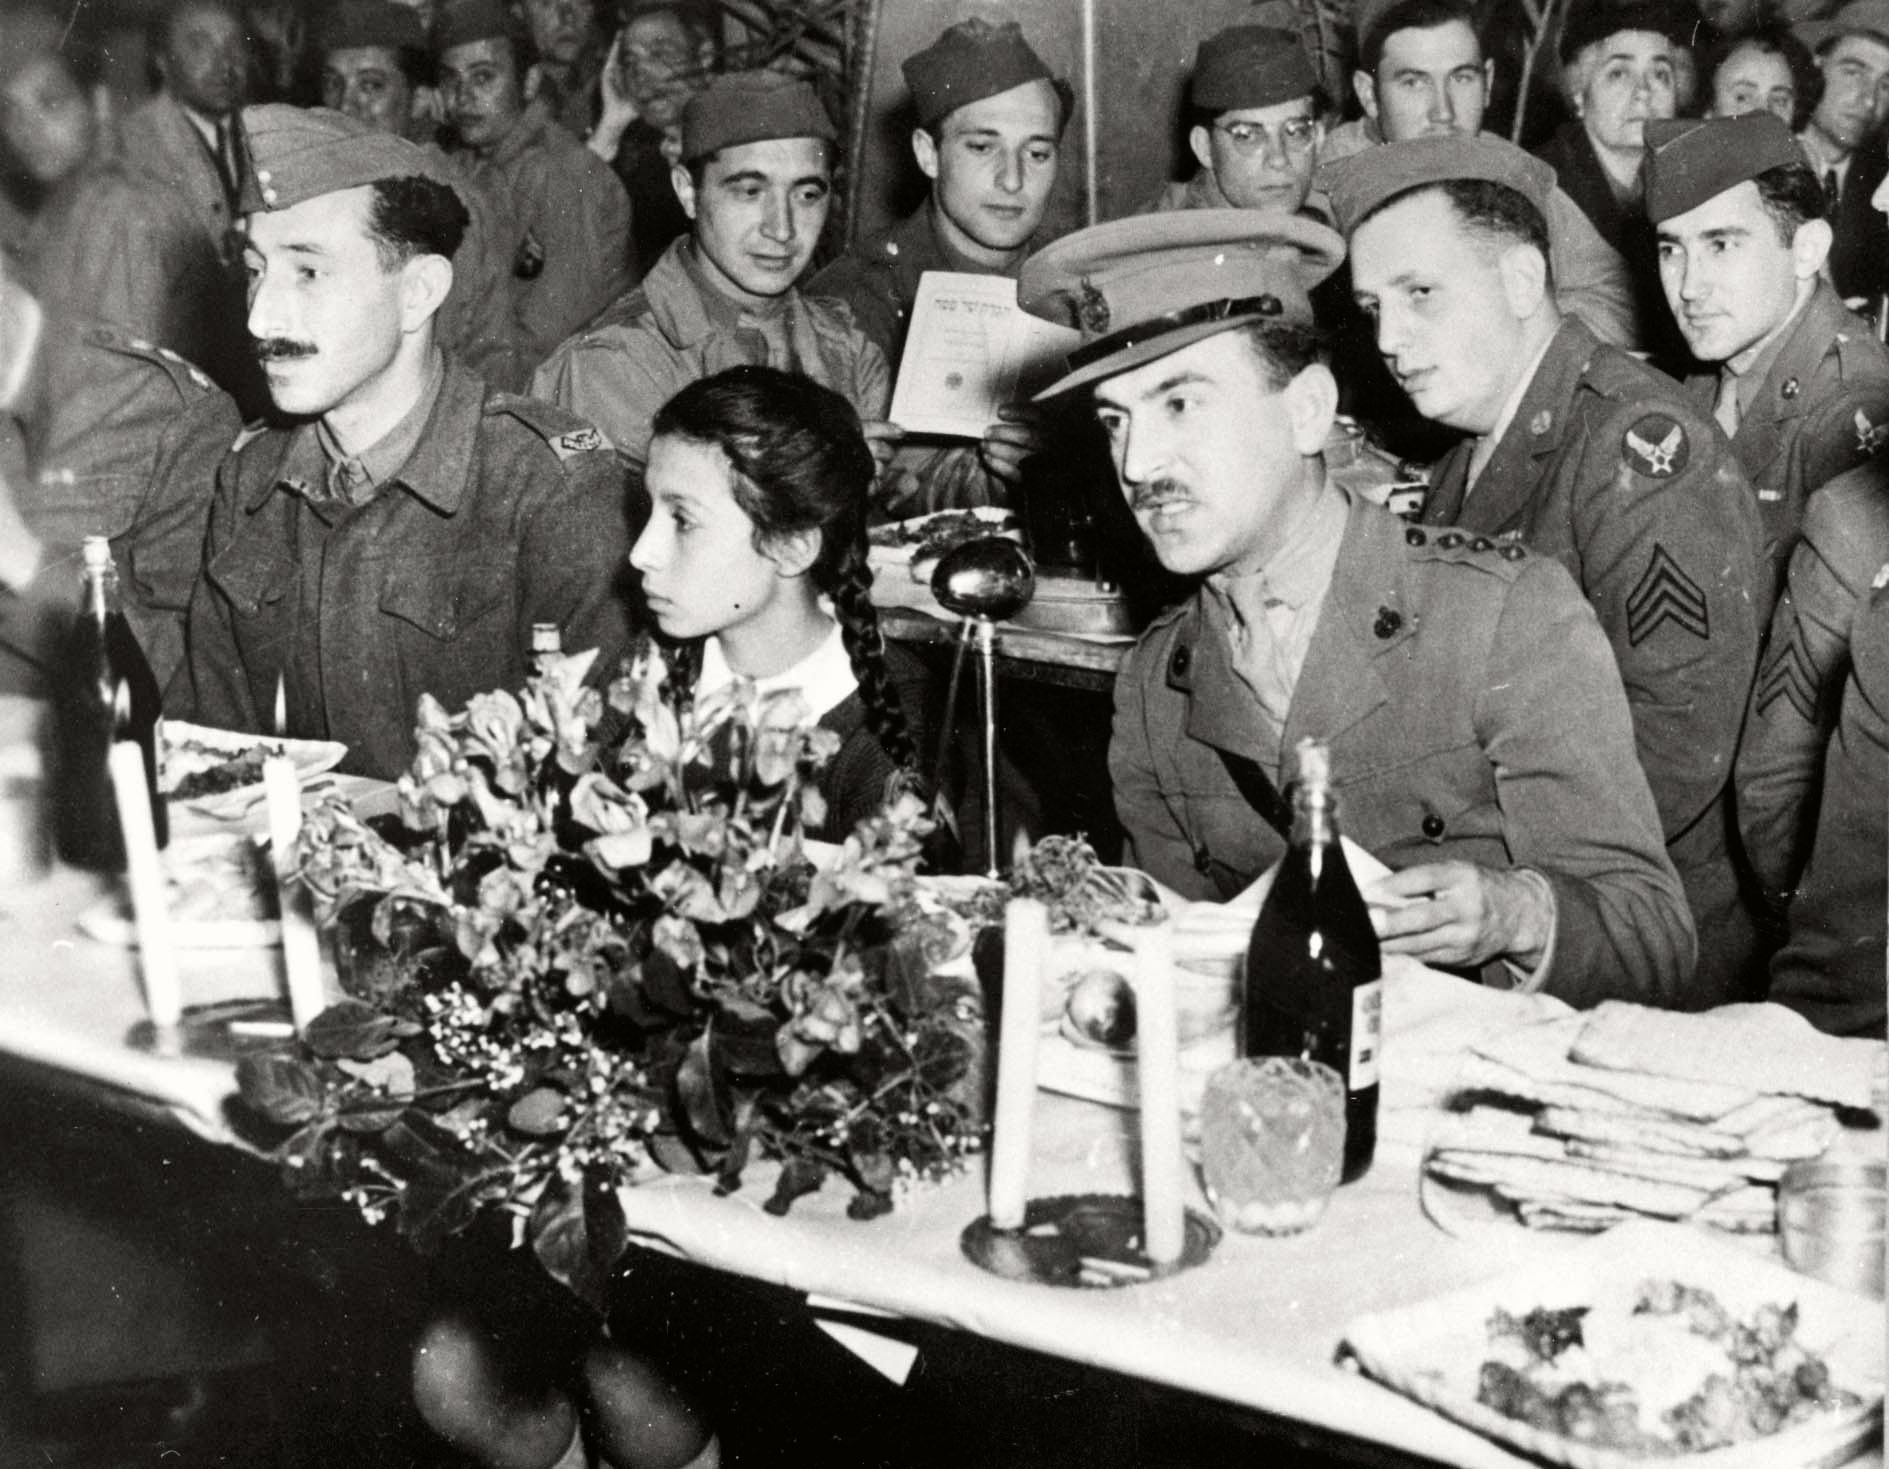 A Passover Seder for Jewish Allied soldiers